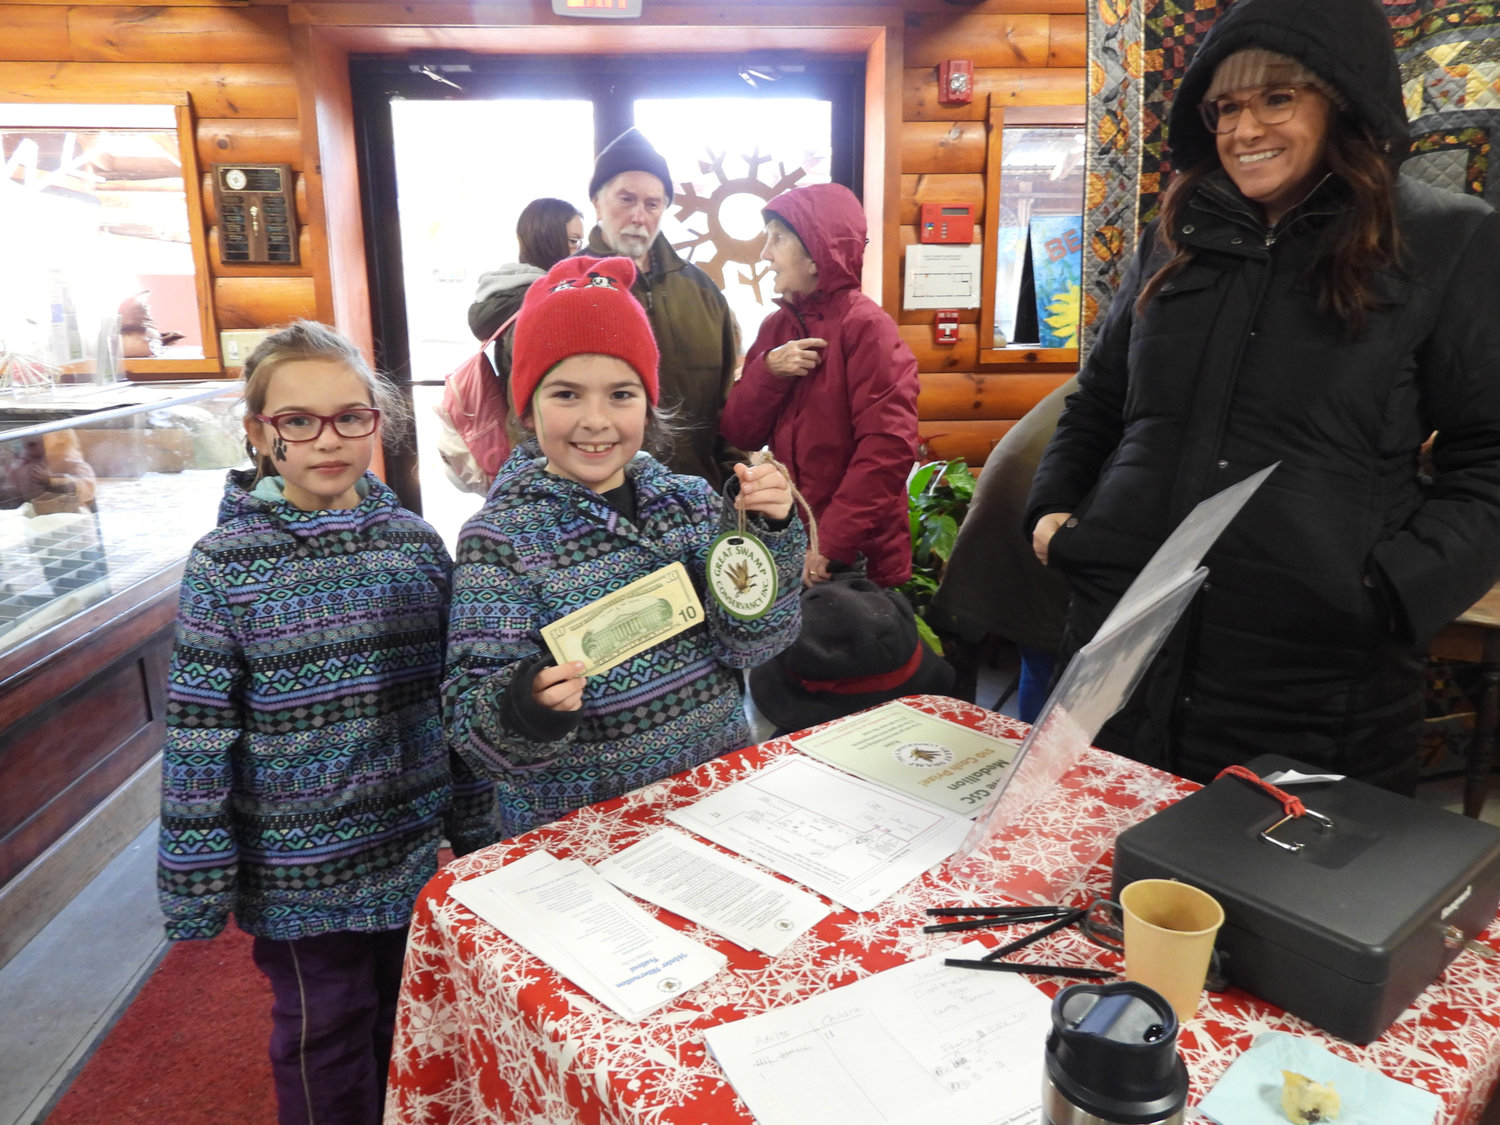 The Winter Hibernation Festival at the Great Swamp Conservancy saw people from all over, including Liverpool natives Grace Prentice, 8, center, and Charlotte Prentice, 5, right. Grace found the hidden medallion at the Great Swamp Conservancy and won herself $10, which she promptly donated right back to the Great Swamp Conservancy